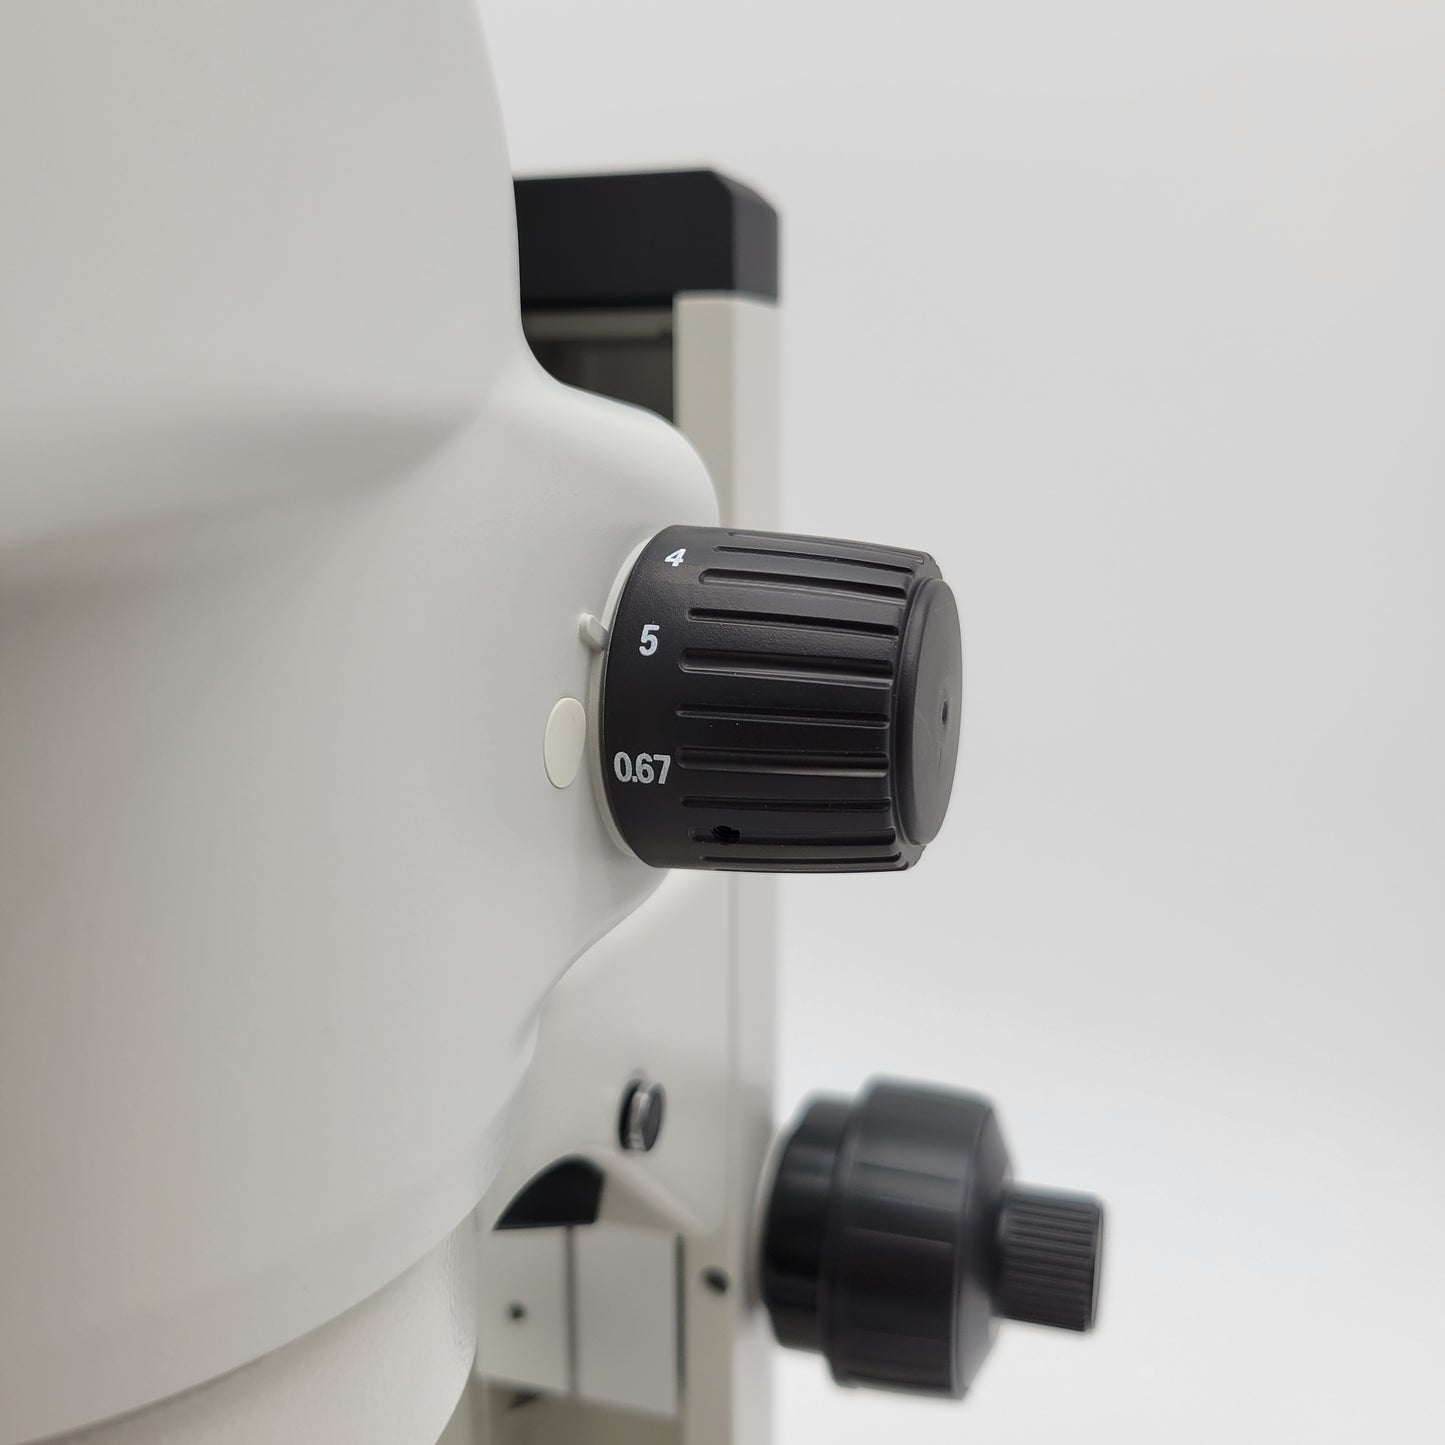 Nikon Stereo Microscope SMZ745 with Transmitted & Reflected Light Stand - microscopemarketplace